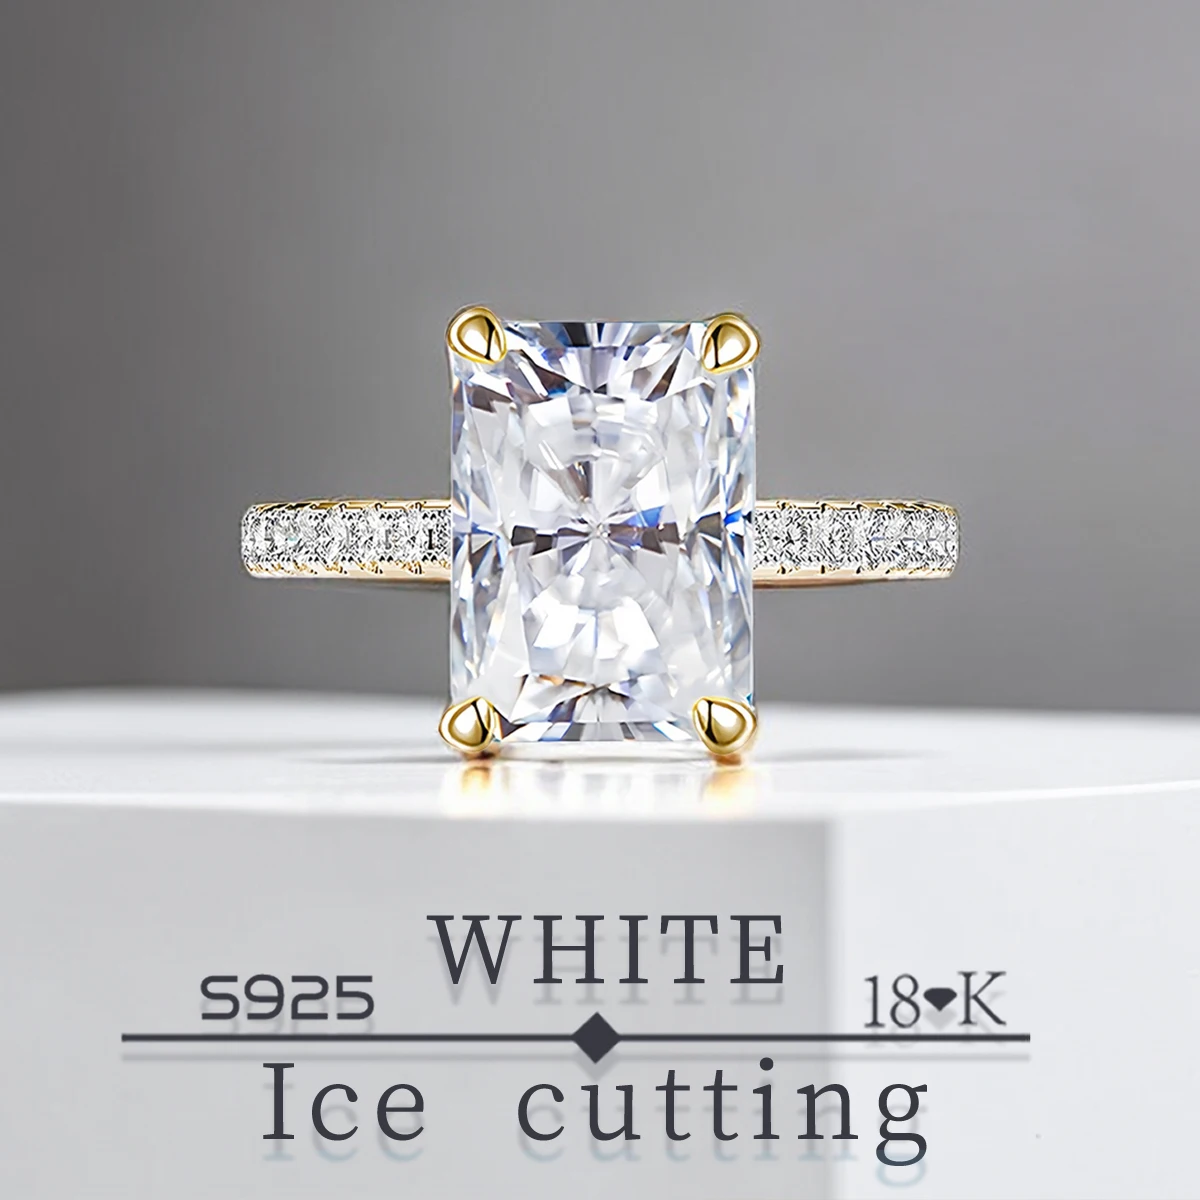 

S925 Sterling Silver Fine Quality 3.5carat White Zircon Sparkle 5A Good quality Ice Cut Ladies ring